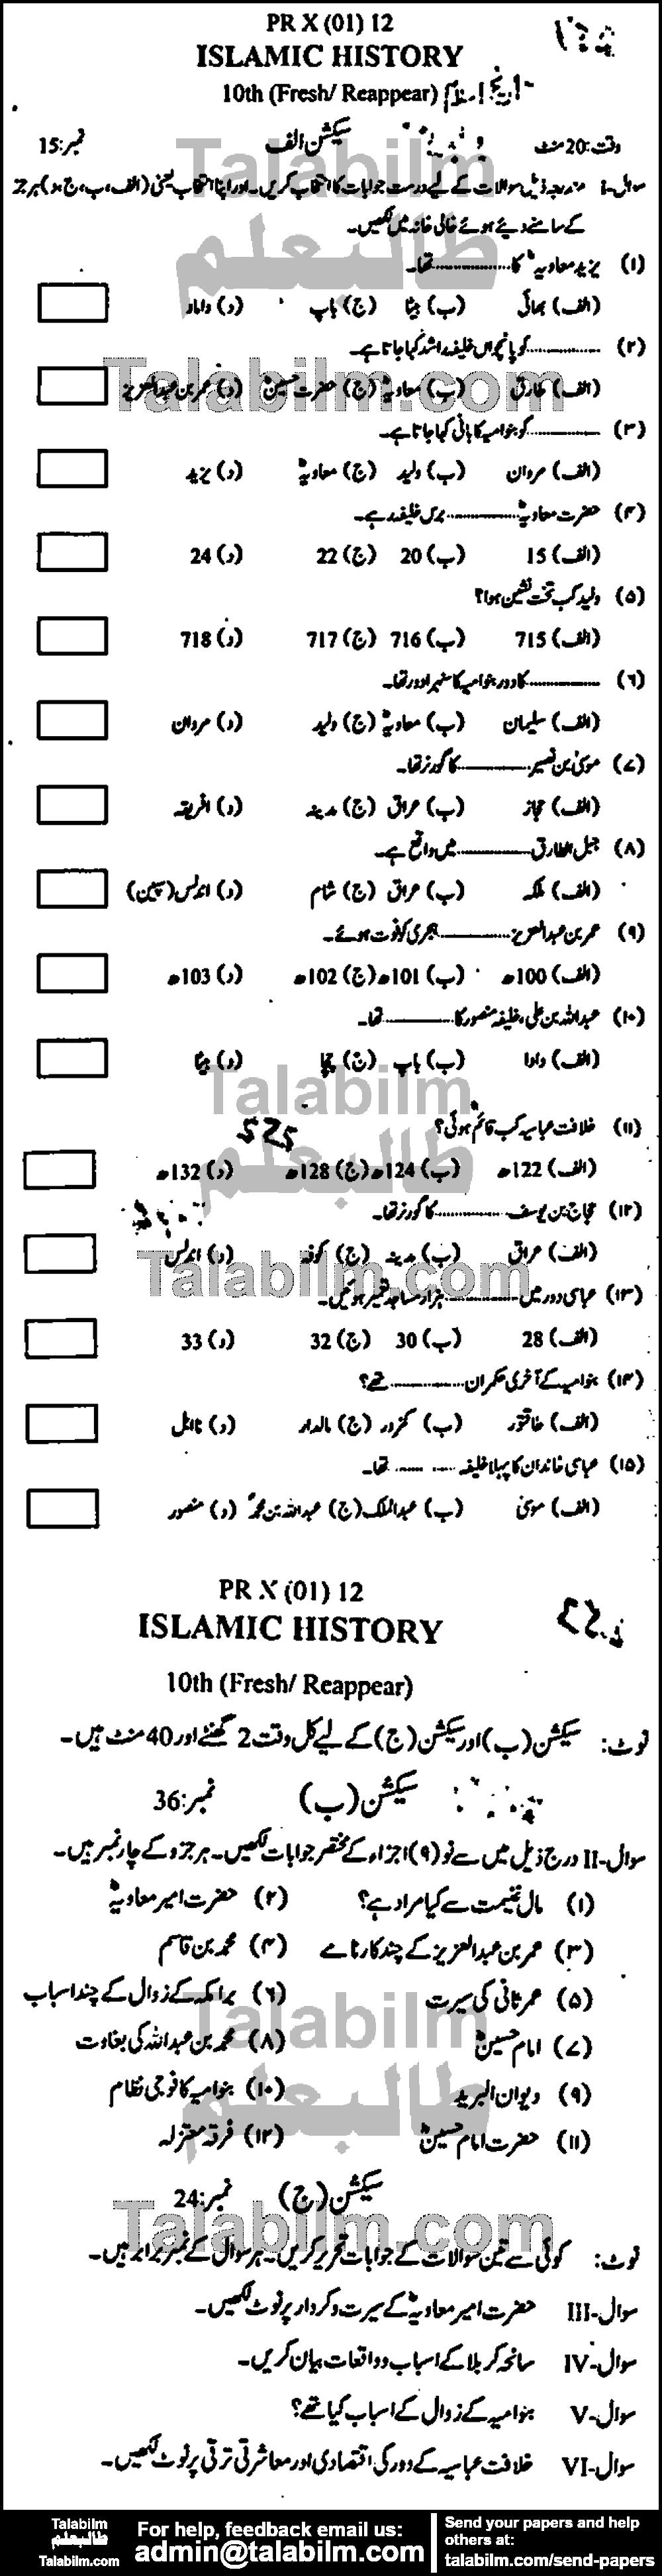 Health And Physical Education 0 past paper for Urdu Medium 2012 Group-I